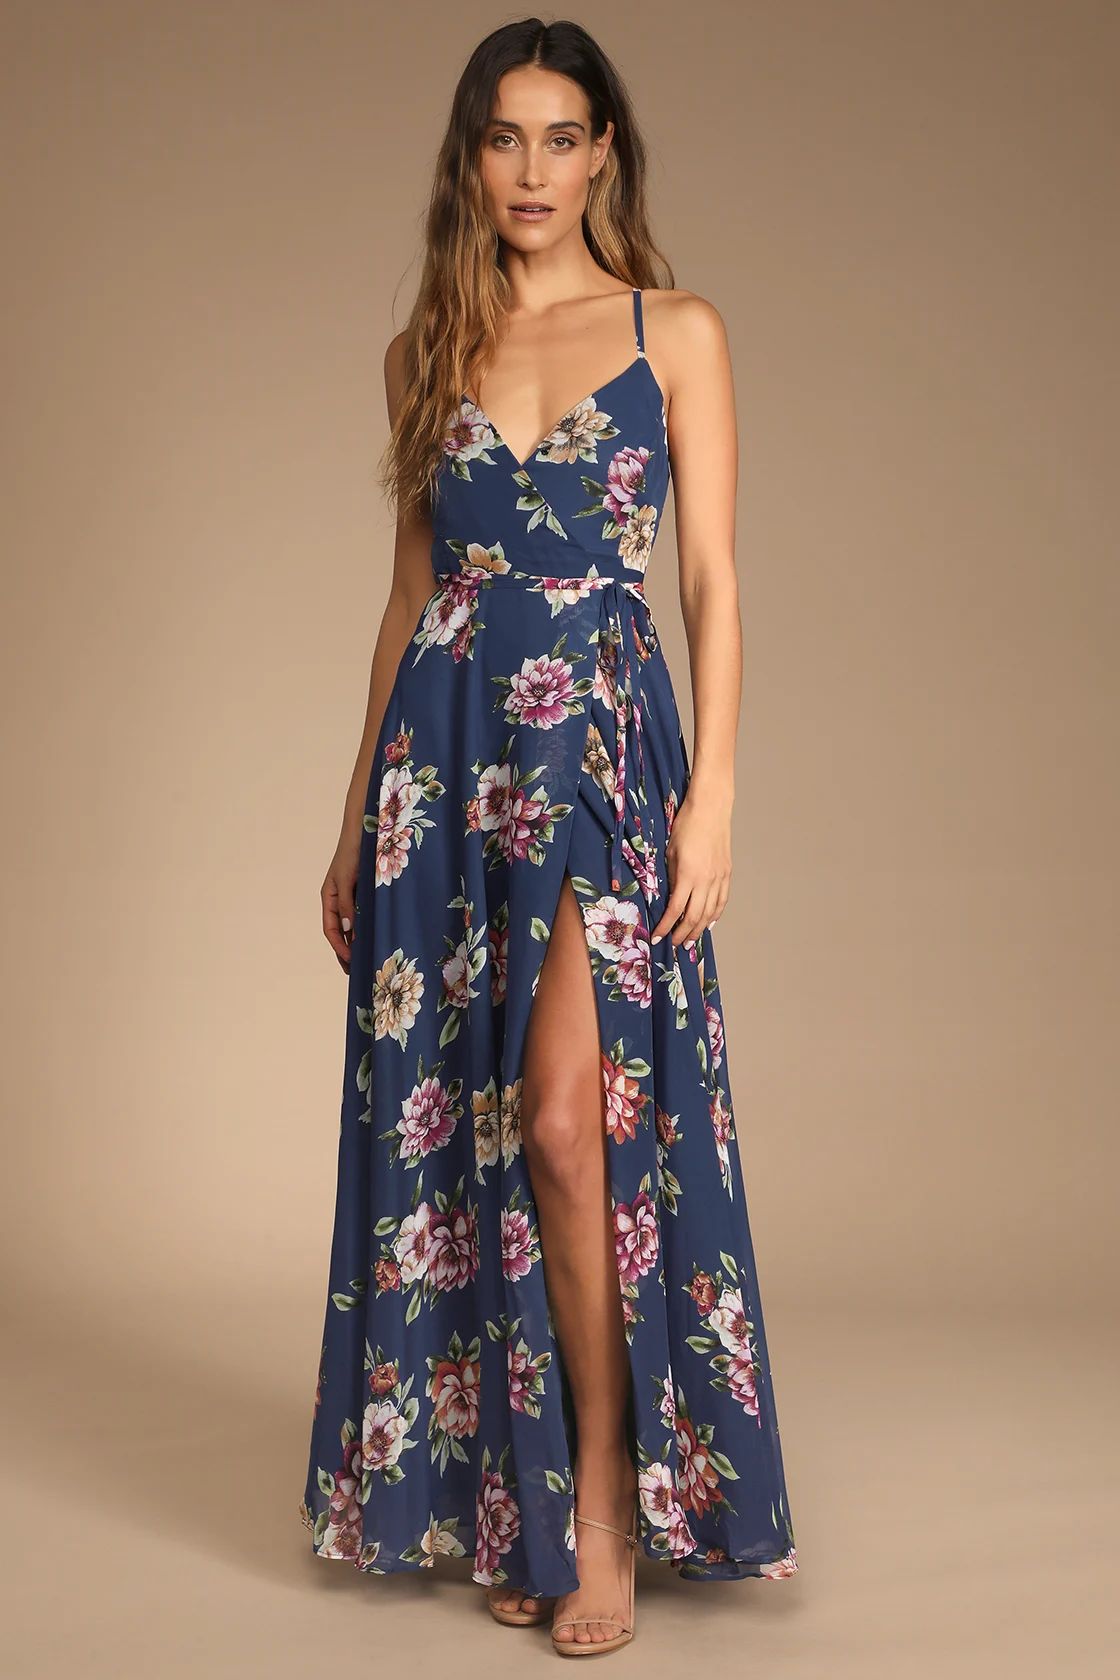 Always There For Me Navy Blue Floral Print Wrap Maxi Dress | Lulus (US)